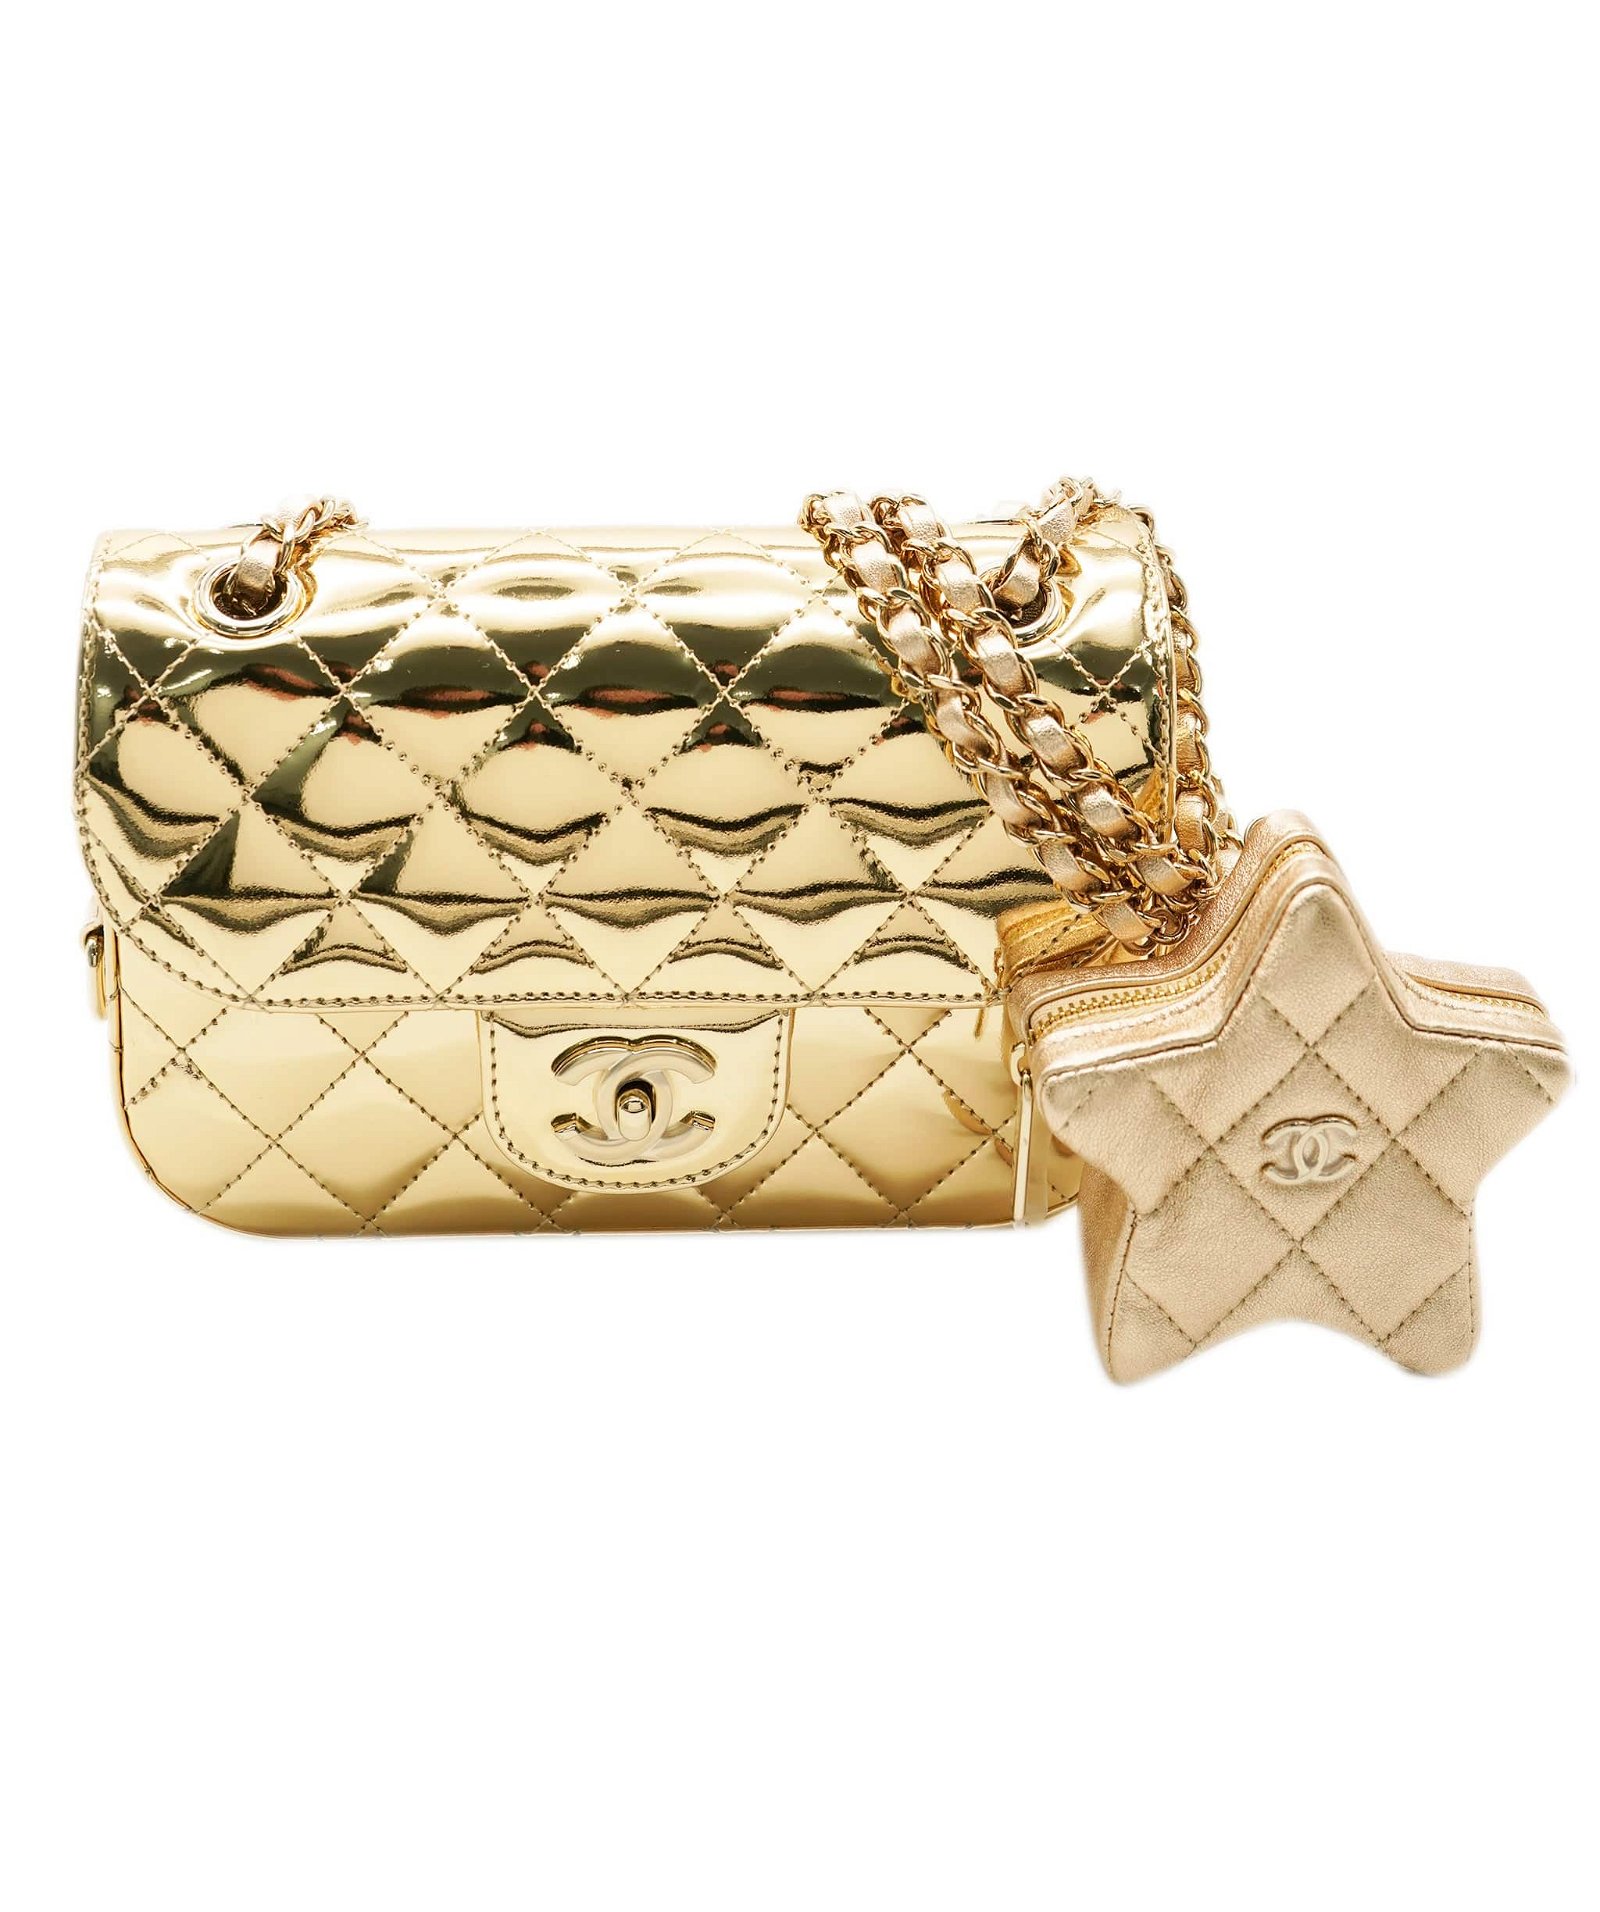 Image of CHANEL FLAP BAG & STAR COIN PURSE ALC1142